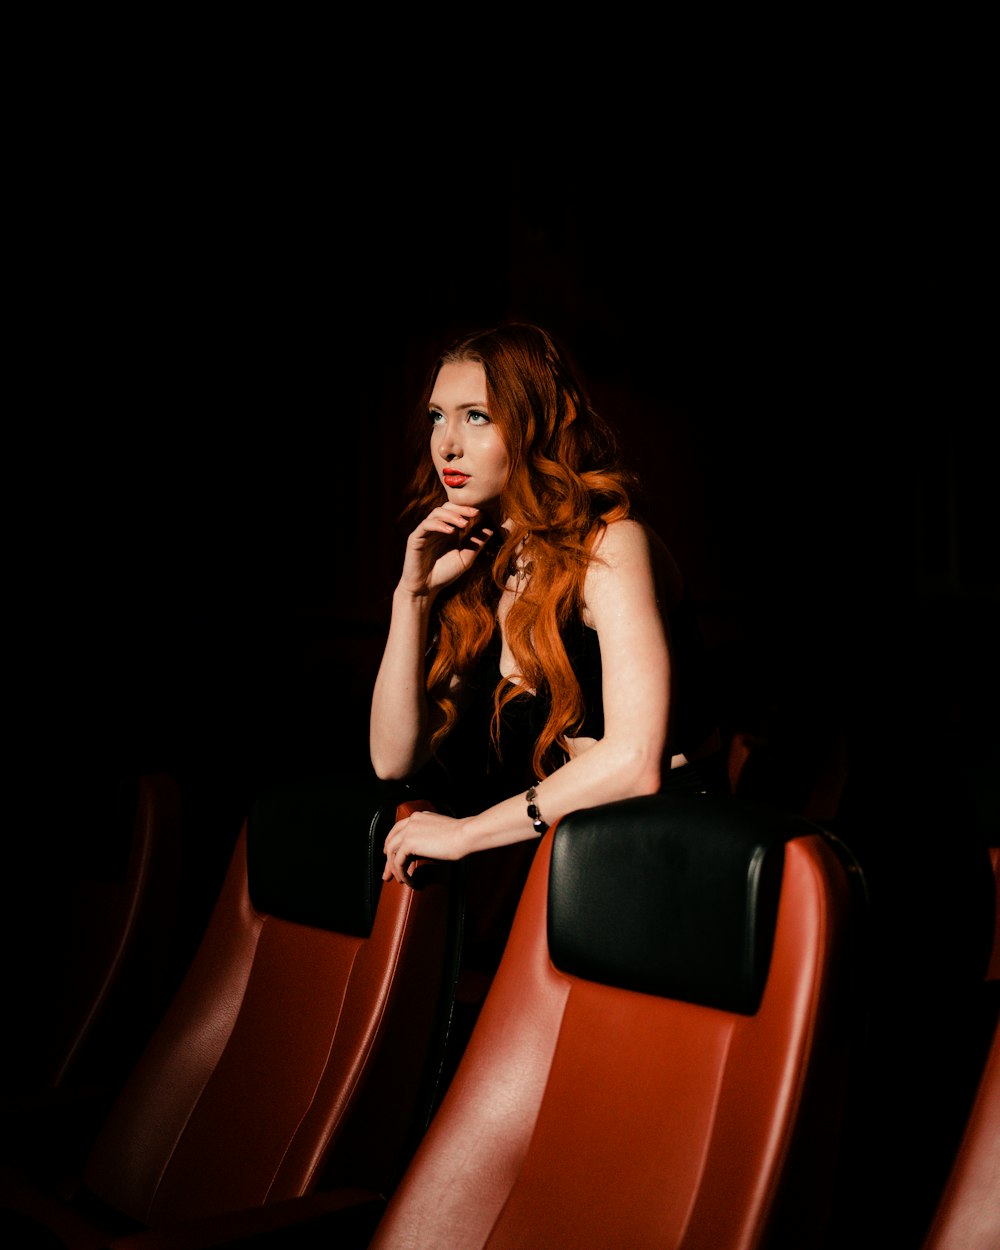 a woman with long red hair sitting on a red chair